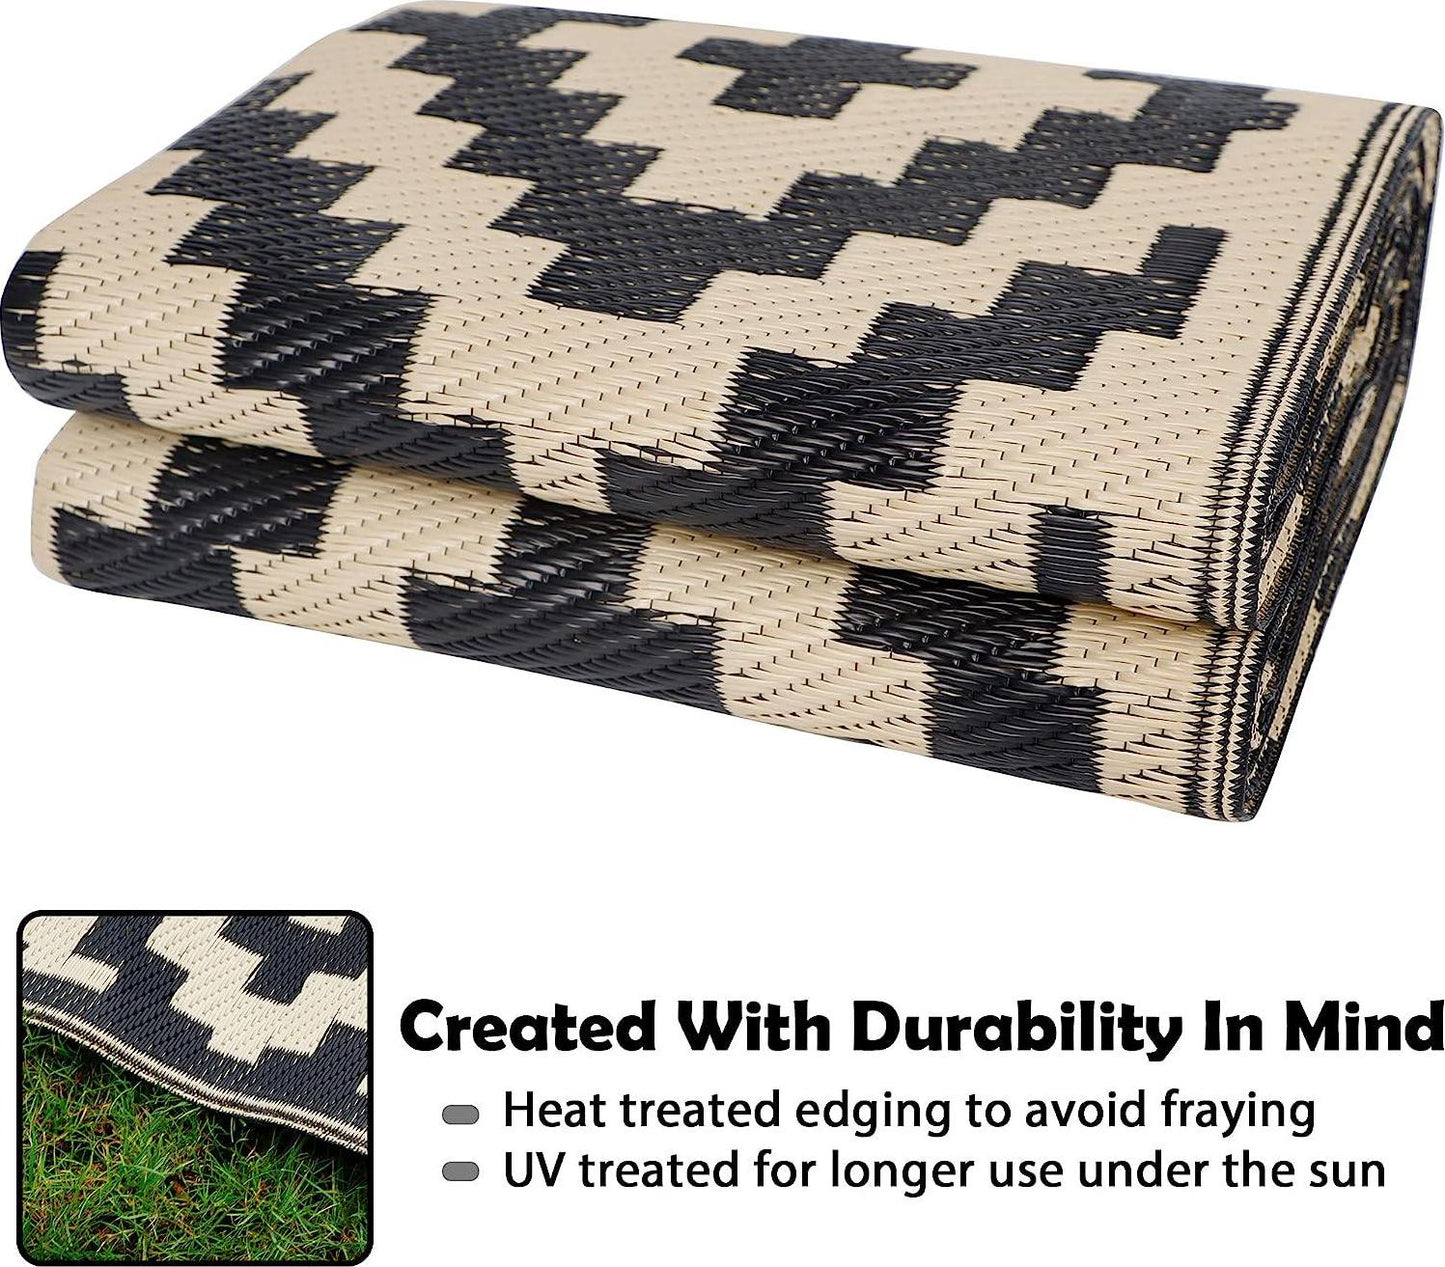 Reversible Mats, Plastic Straw Rug, Modern Area Rug, Large Floor Mat and Rug for Outdoors, Black and Beige, 5'x 8'